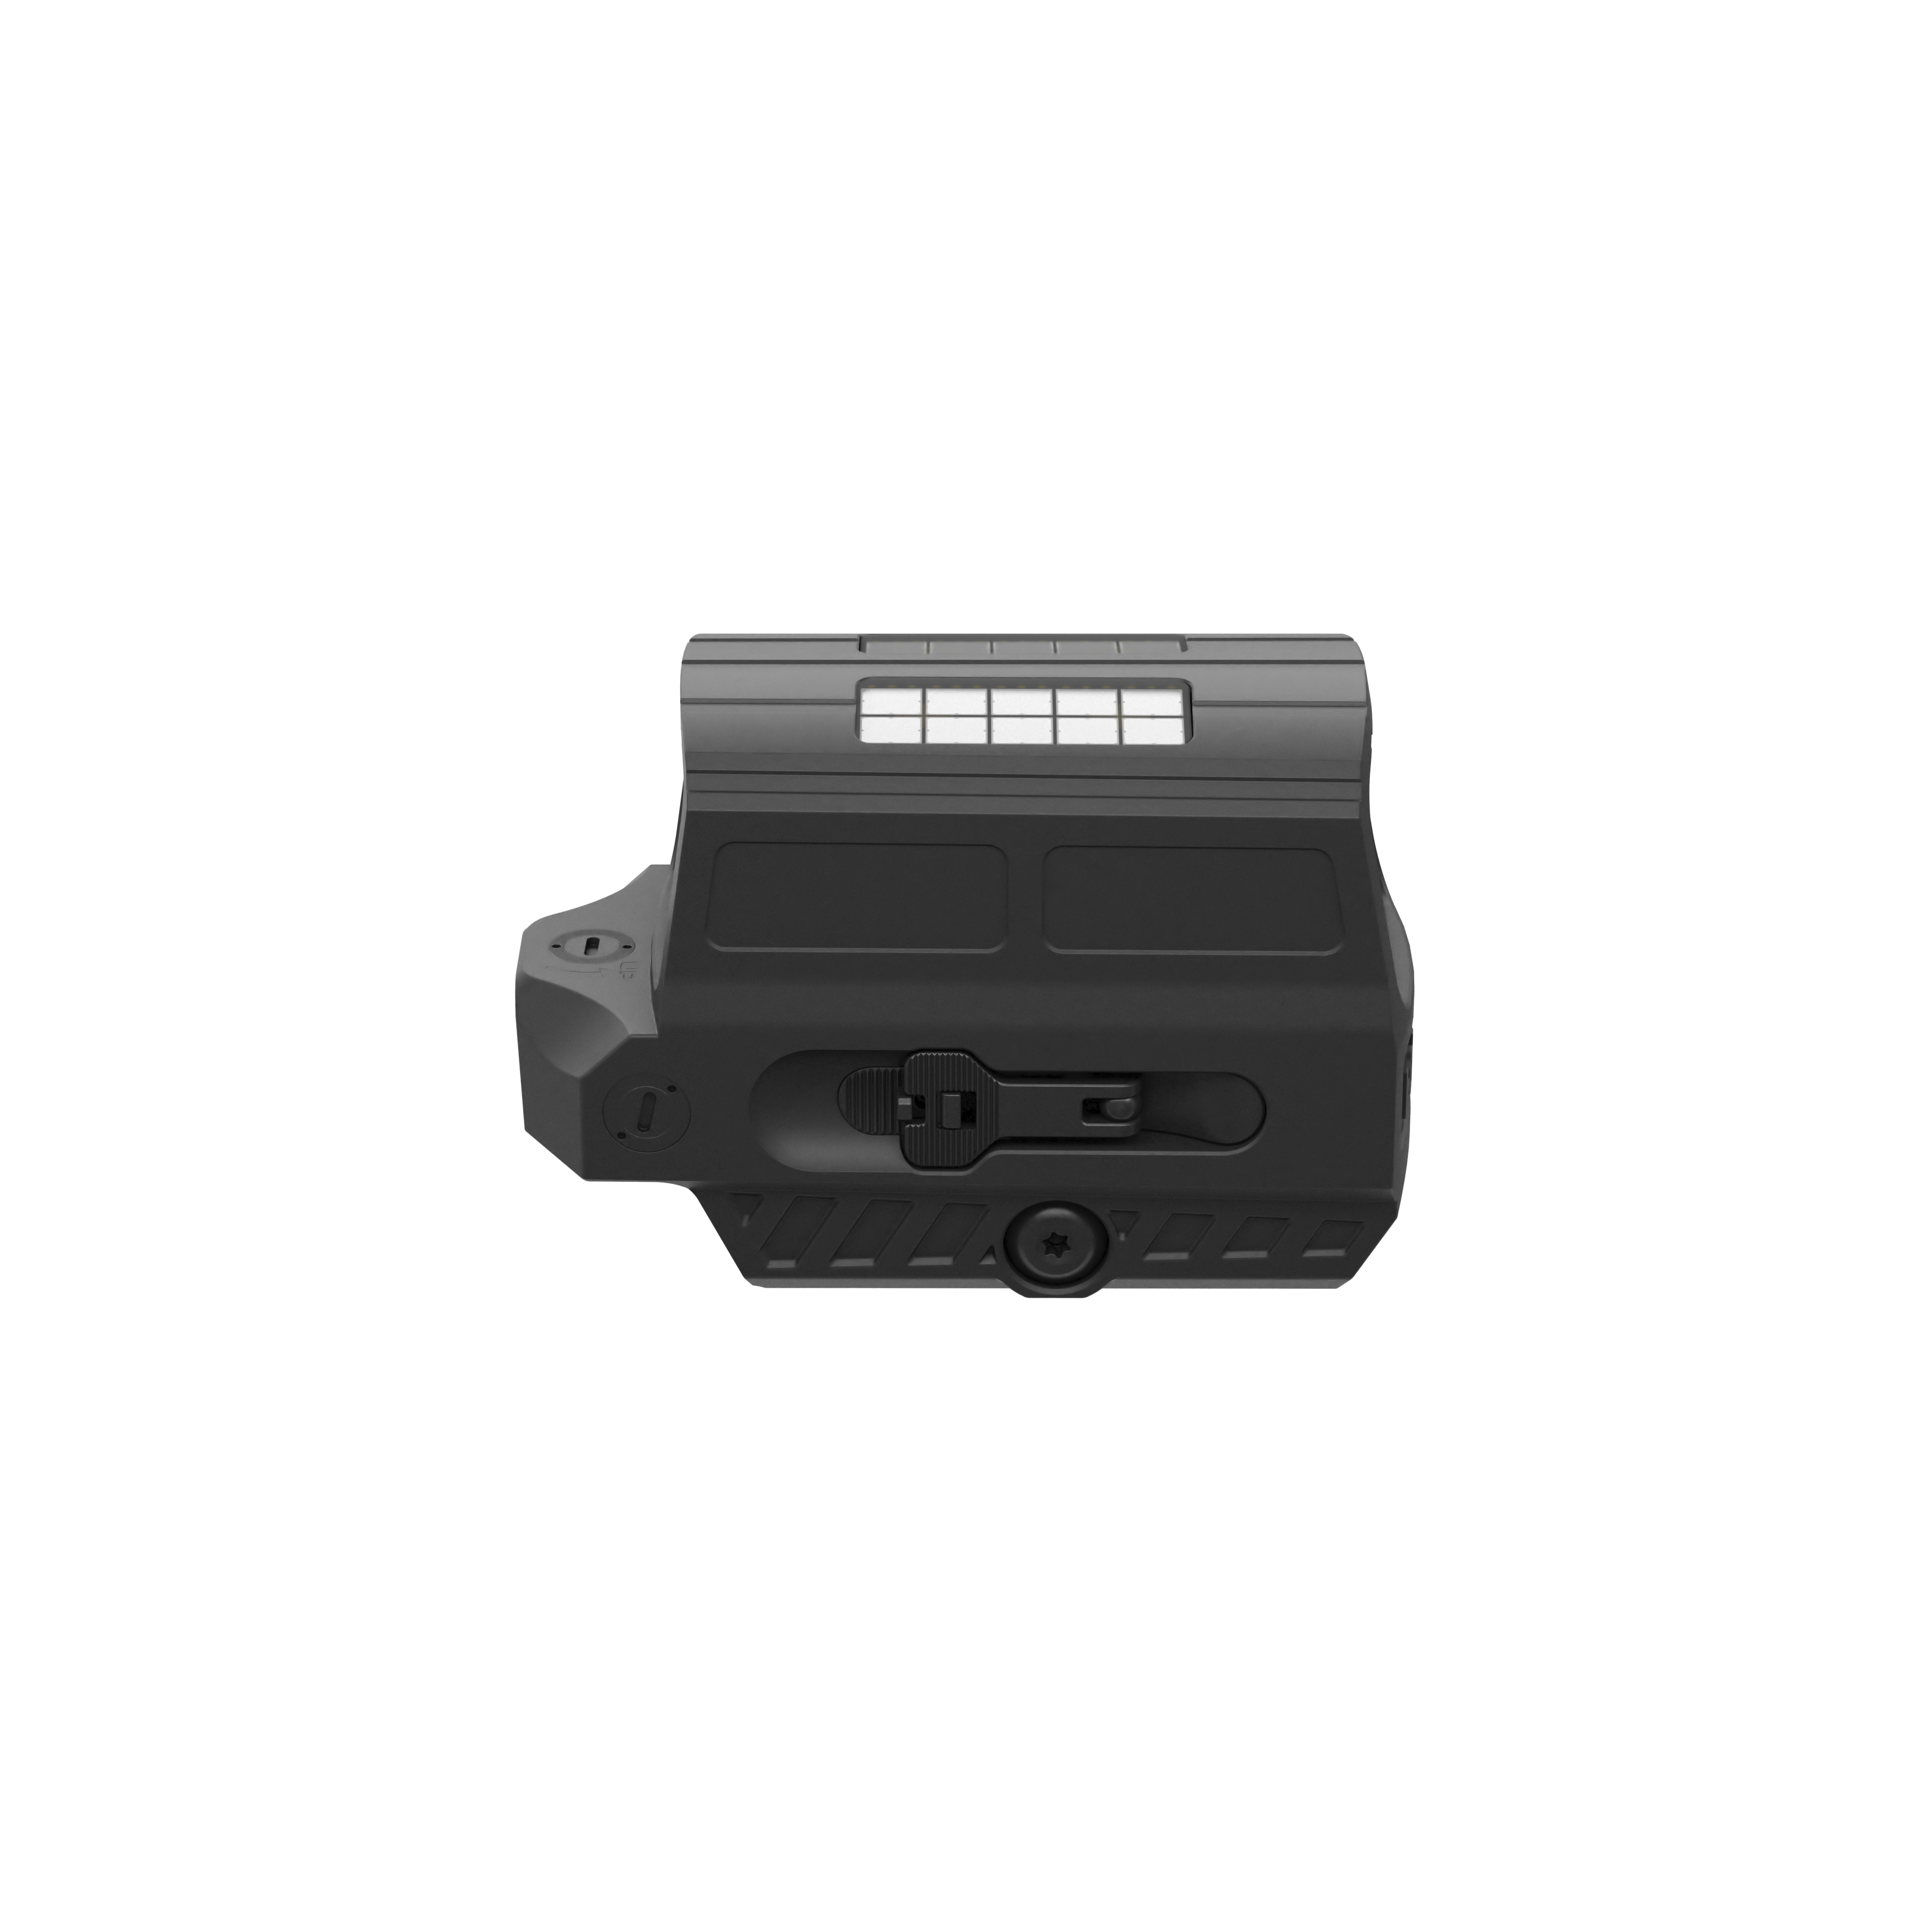 Holosun Classic Reflex Red Dot Sight HS512C-RD with switchable reticle and aluminium housing, milit…